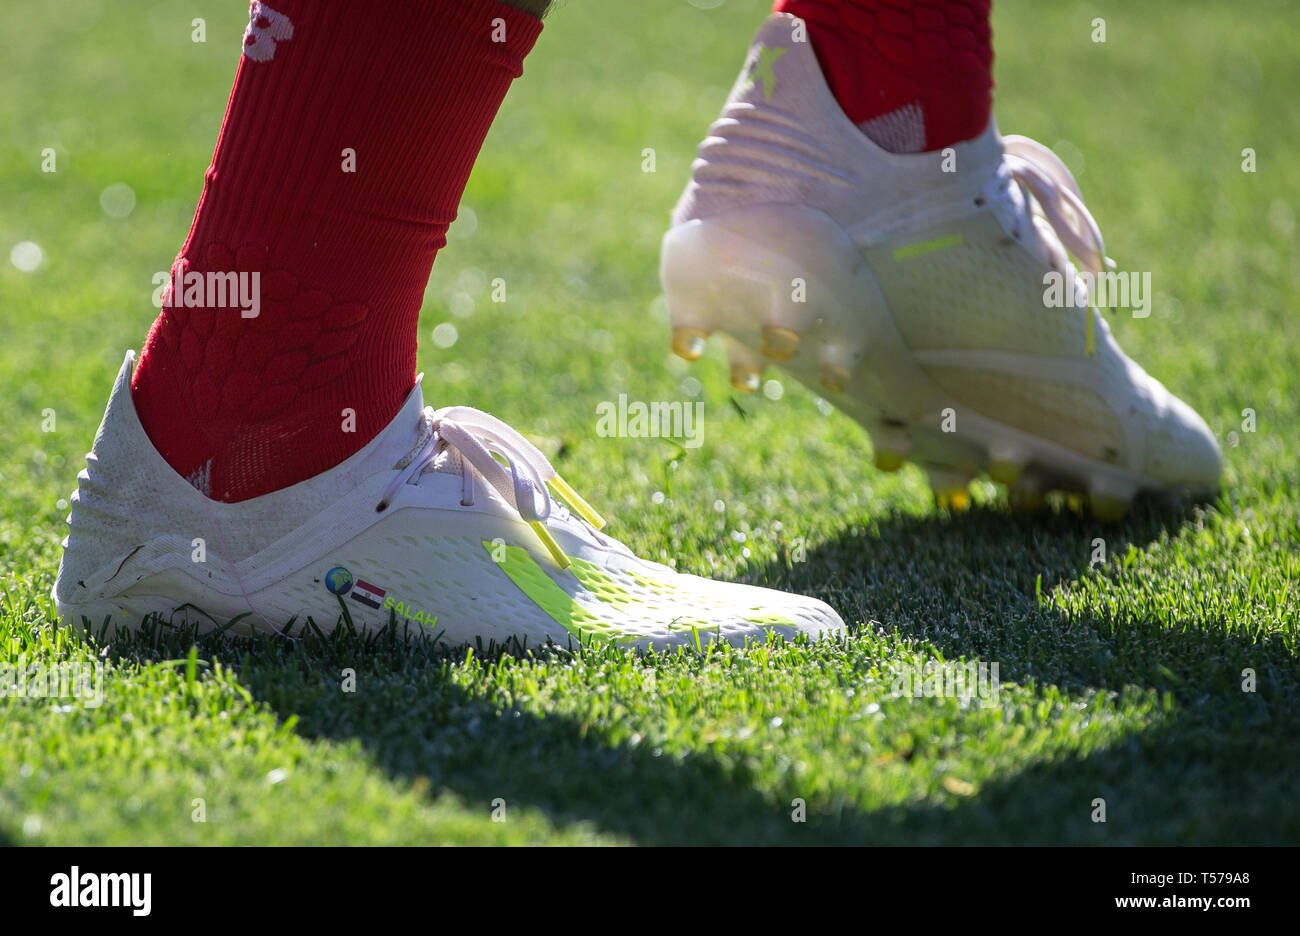 Cardiff, UK. 21st Apr, 2019. The Adidas X football boots of Mohamed Salah  of Liverpool displaying World icon, Egypt flag & SALAH during the Premier  League match between Cardiff City and Liverpool